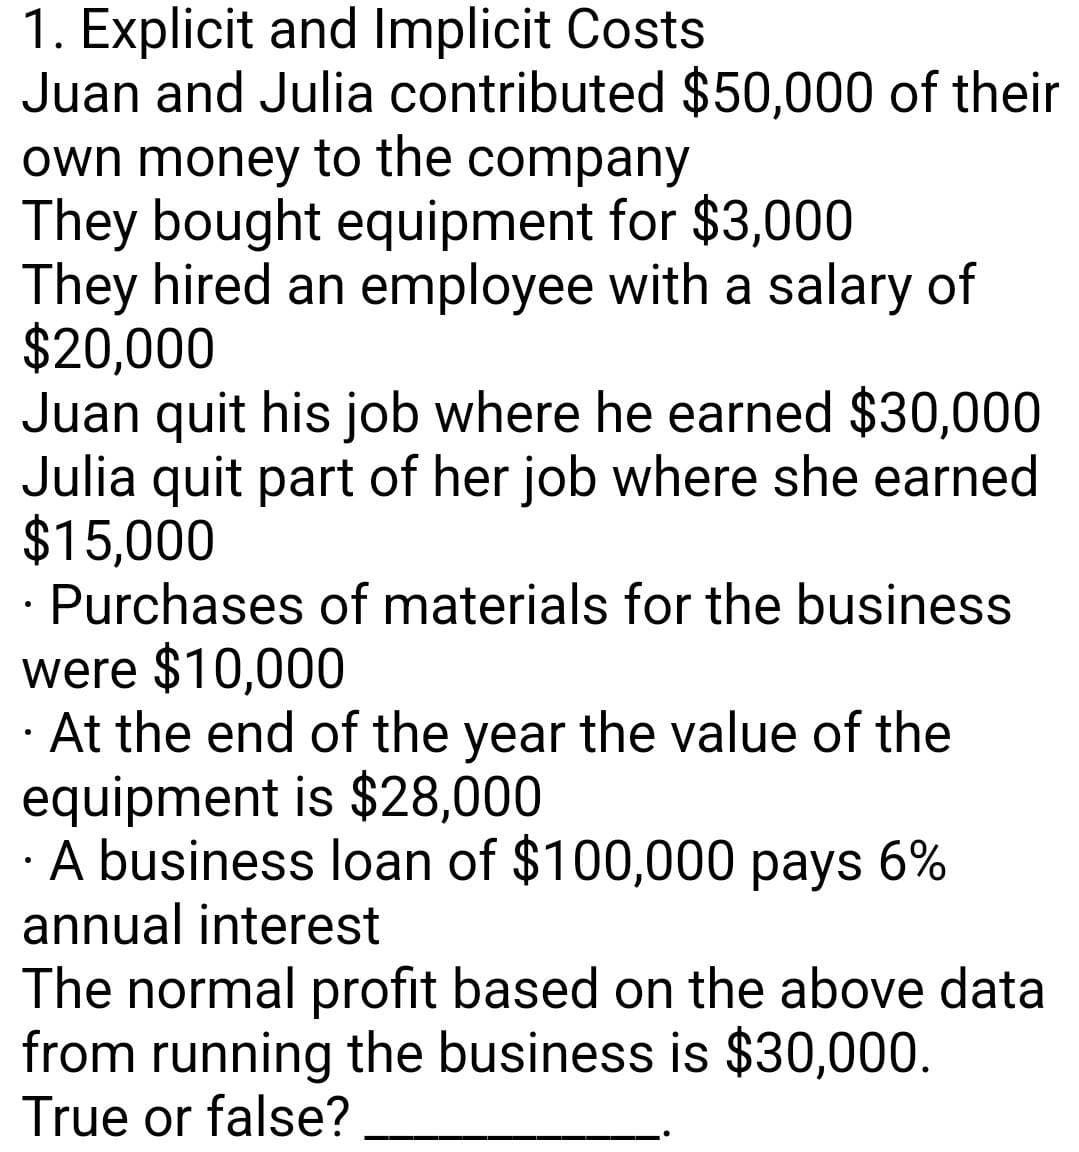 1. Explicit and Implicit Costs
Juan and Julia contributed $50,000 of their
own money to the company
They bought equipment for $3,000
They hired an employee with a salary of
$20,000
Juan quit his job where he earned $30,000
Julia quit part of her job where she earned
$15,000
· Purchases of materials for the business
were $10,000
· At the end of the year the value of the
equipment is $28,000
· A business loan of $100,000 pays 6%
annual interest
The normal profit based on the above data
from running the business is $30,000.
True or false?
